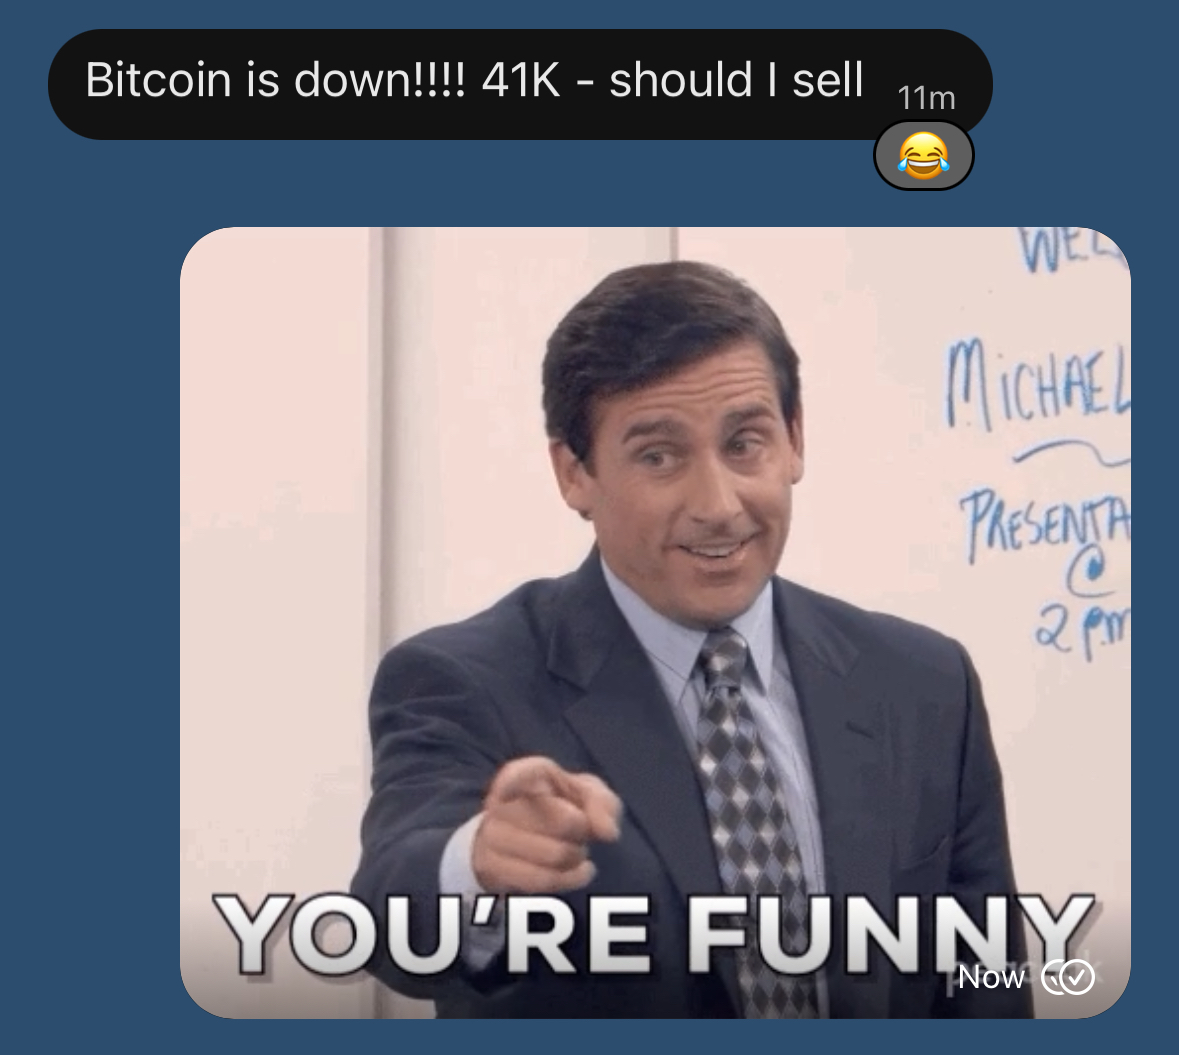 Bitcoin is down!!!! 41K - should I sell 11m
WEL
MICHAEL
PRESENTA
2pm
YOU'RE FUNNY